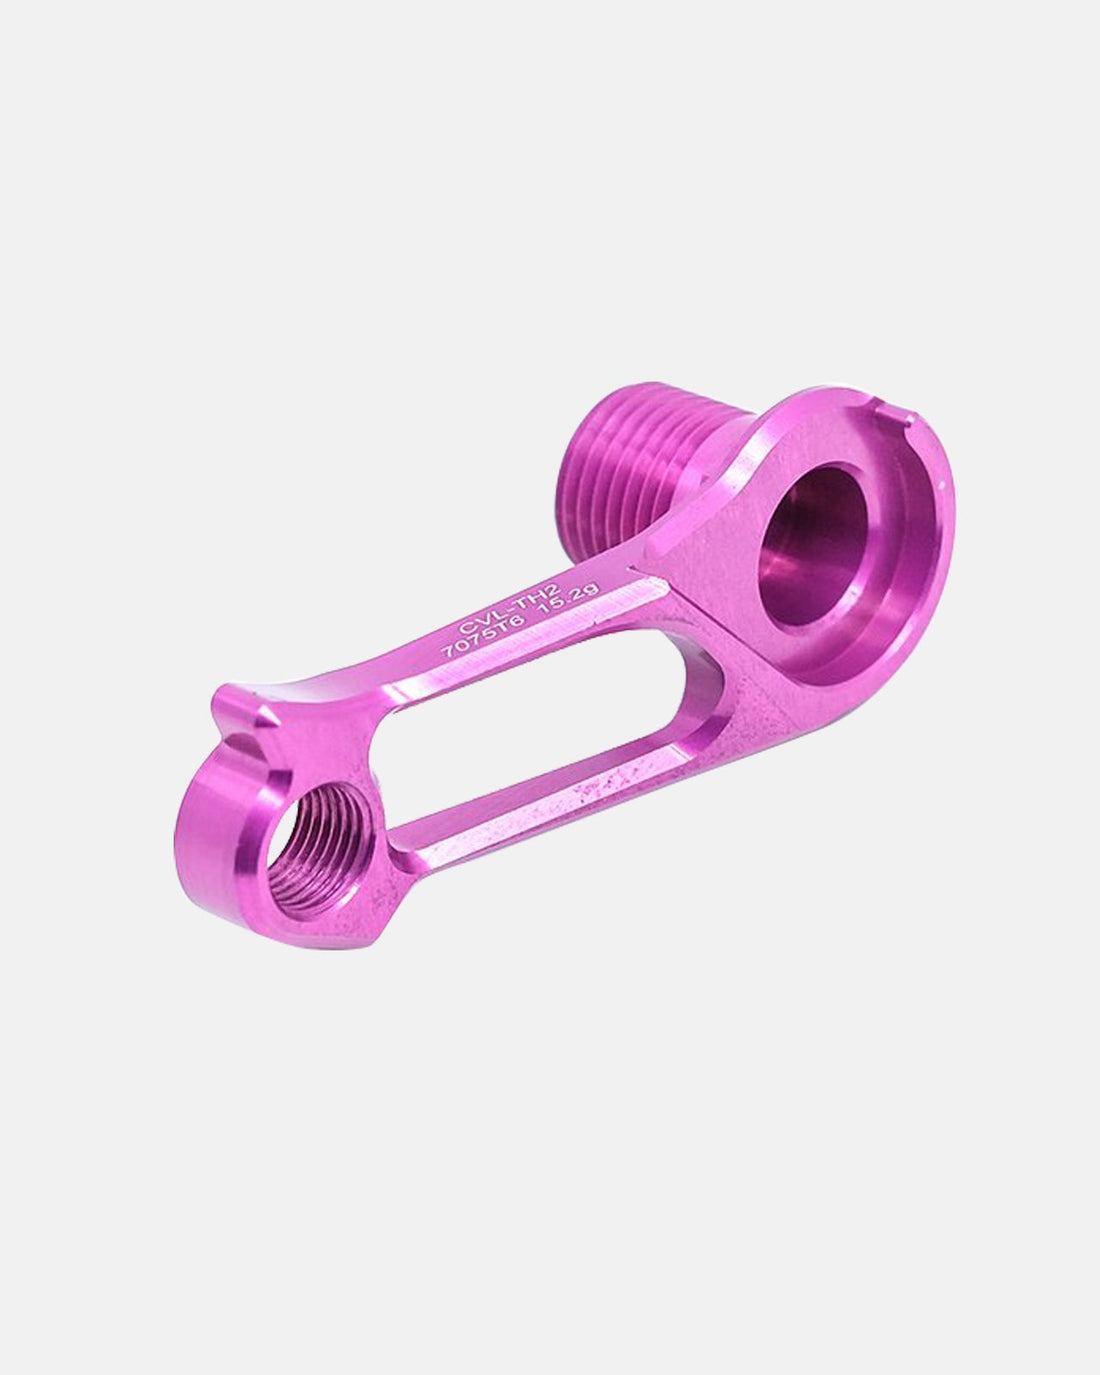 Sigeyi Cervelo Direct-Mount Derailleur Hanger - Anodized Pink